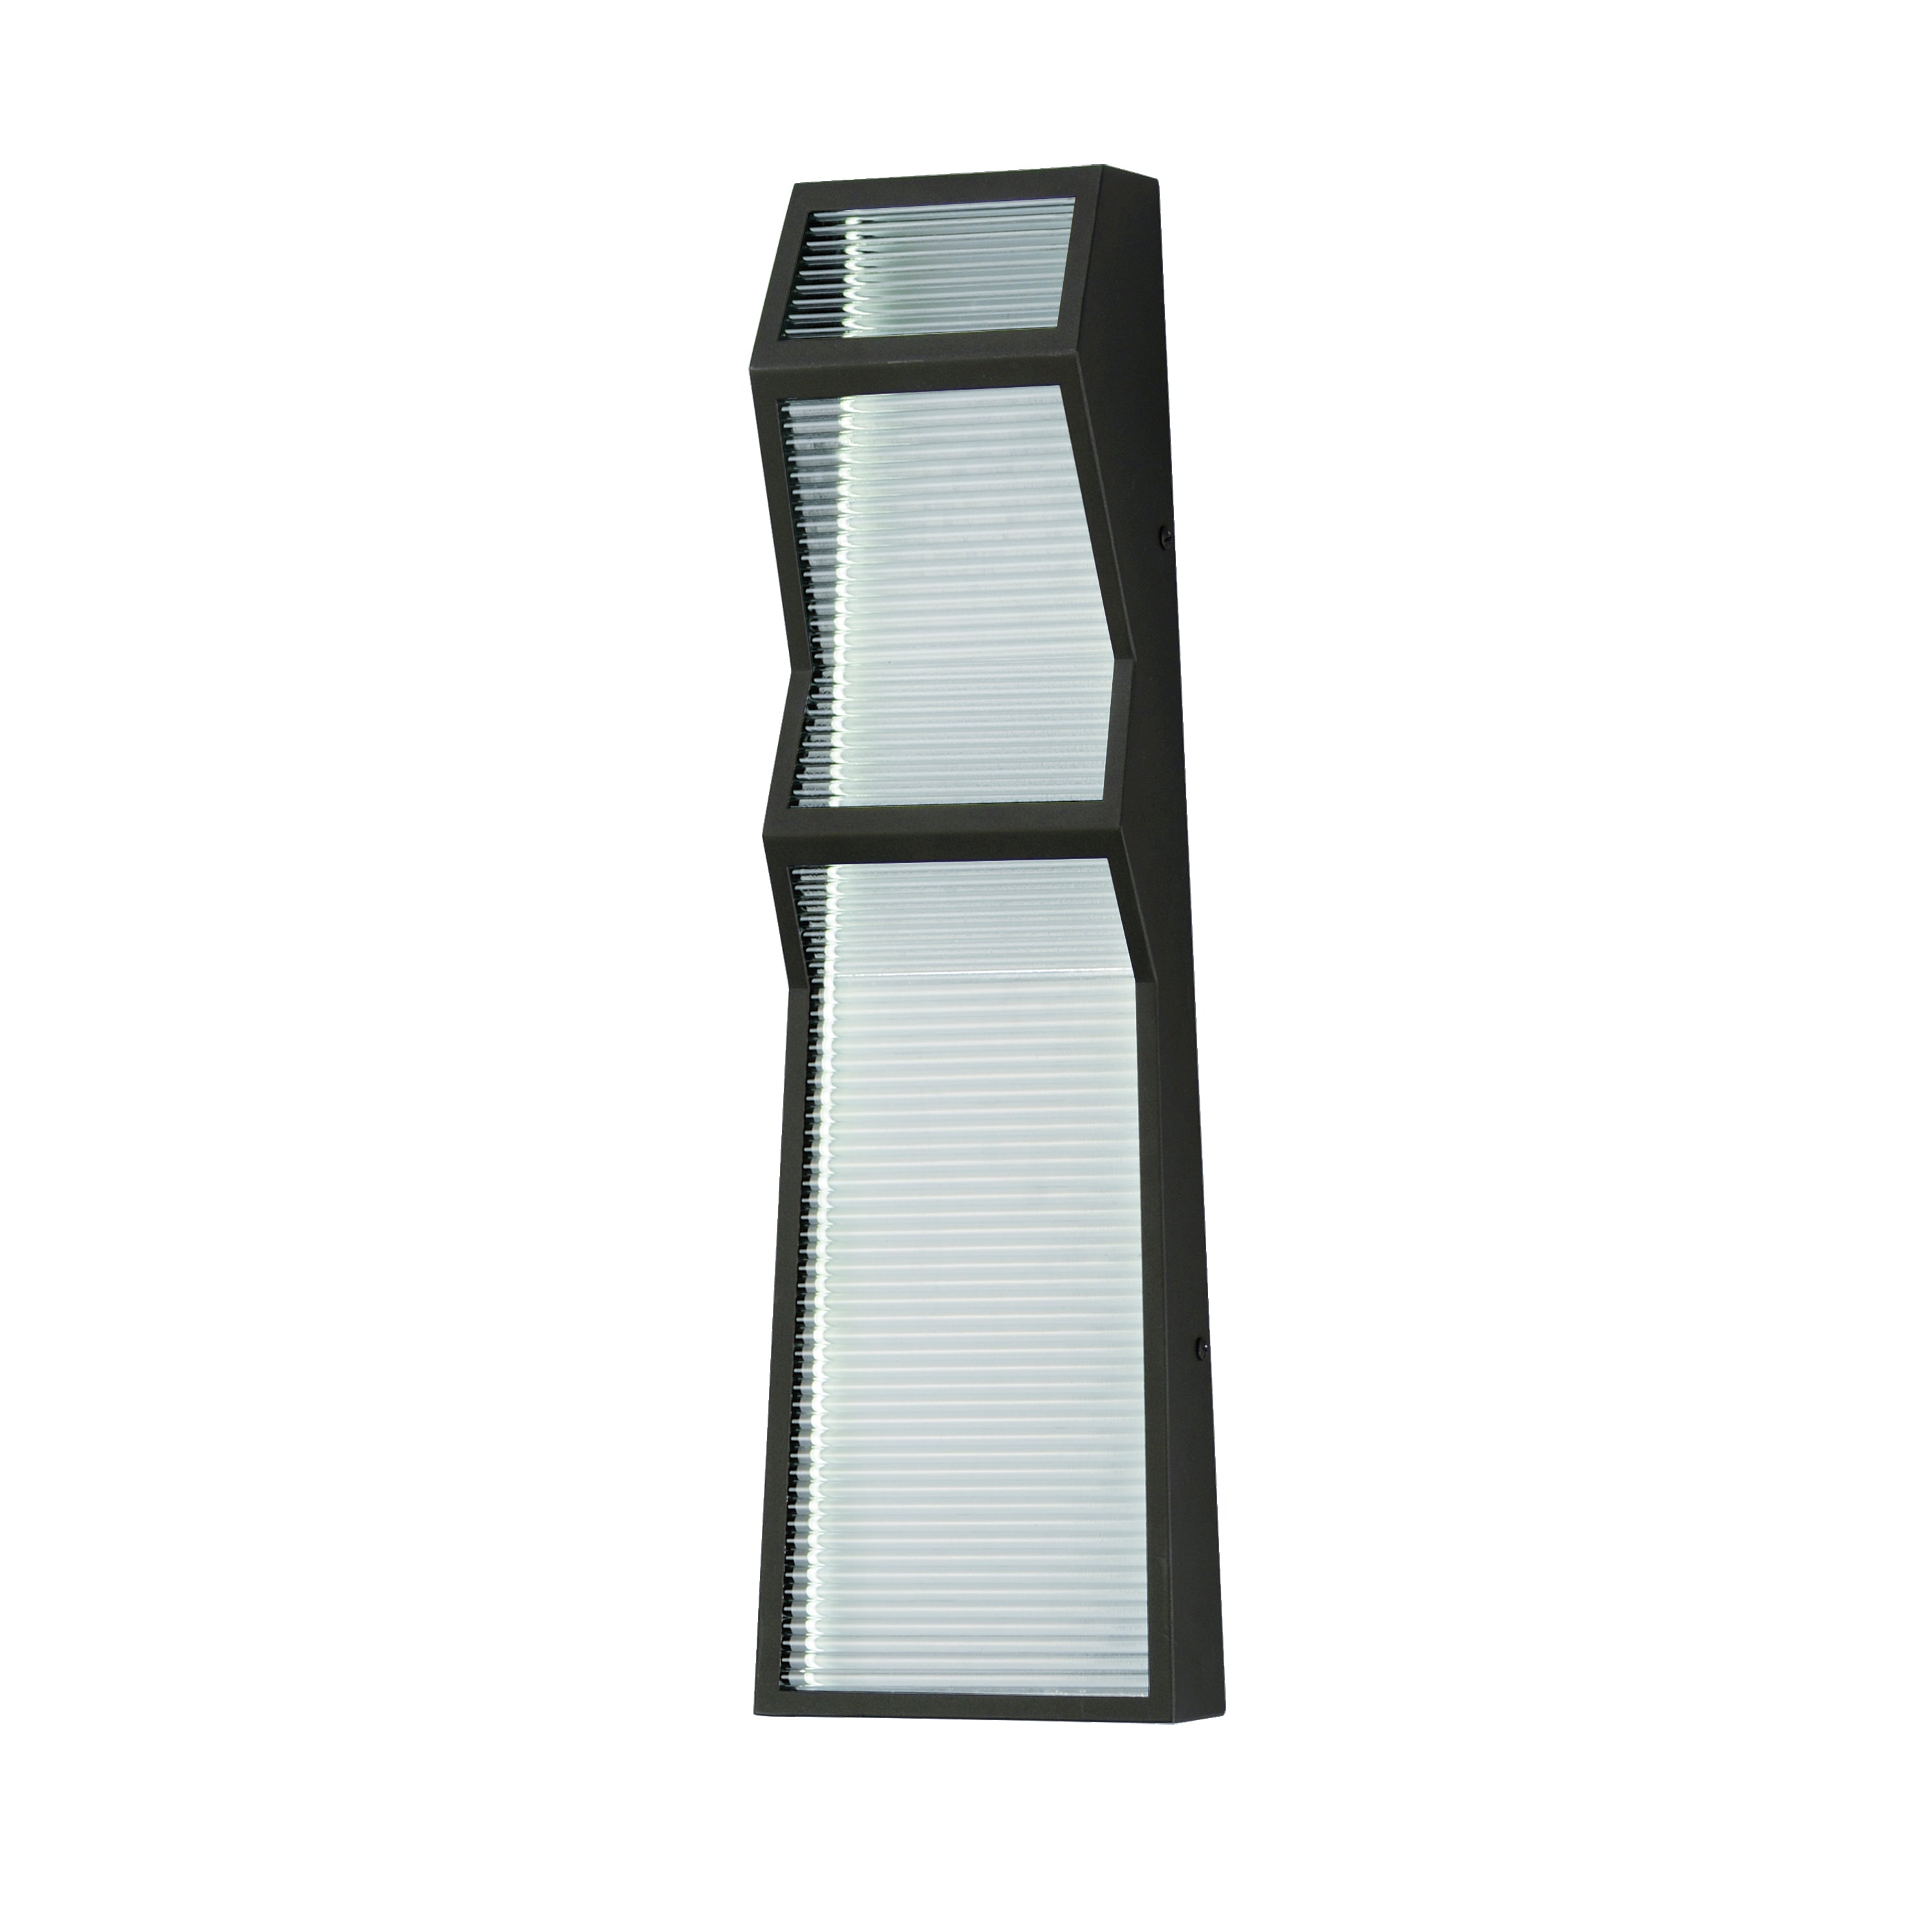 Totem-Outdoor Wall Mount Outdoor l Wall ET2 x6x20 Black 